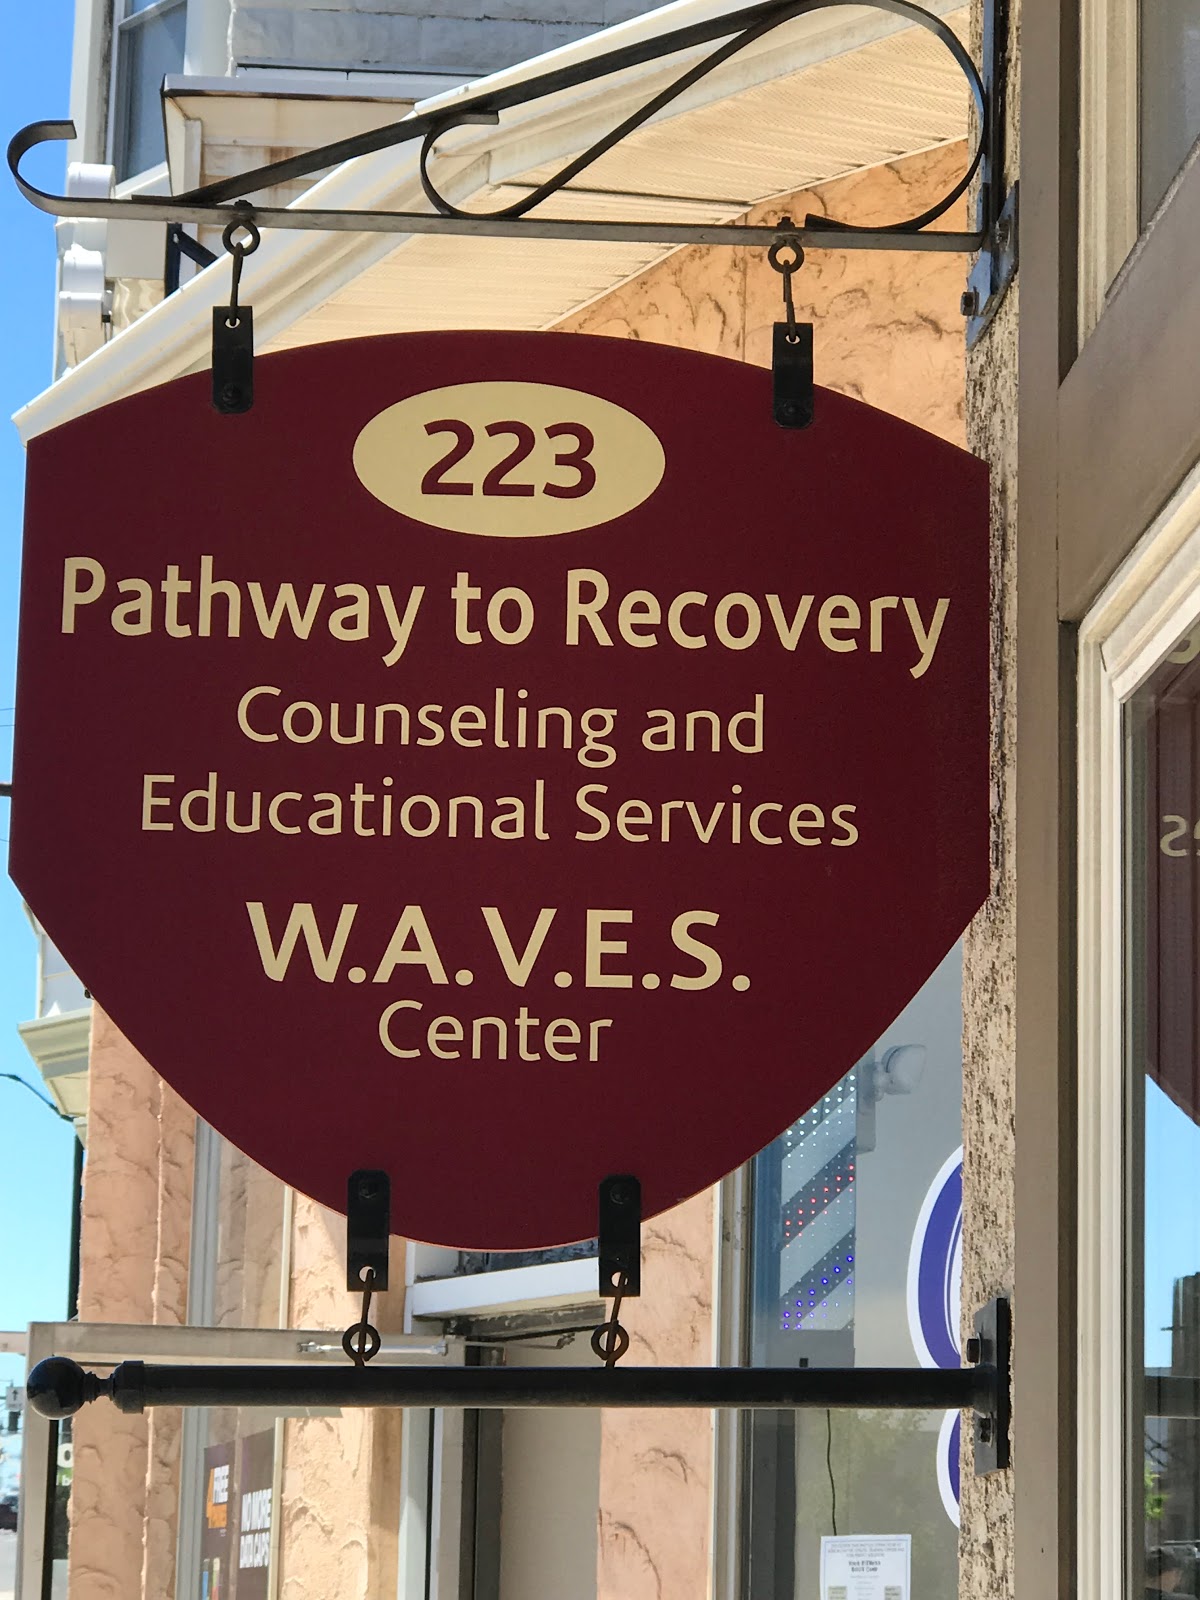 Pathway to Recovery - Counseling and Educational Services